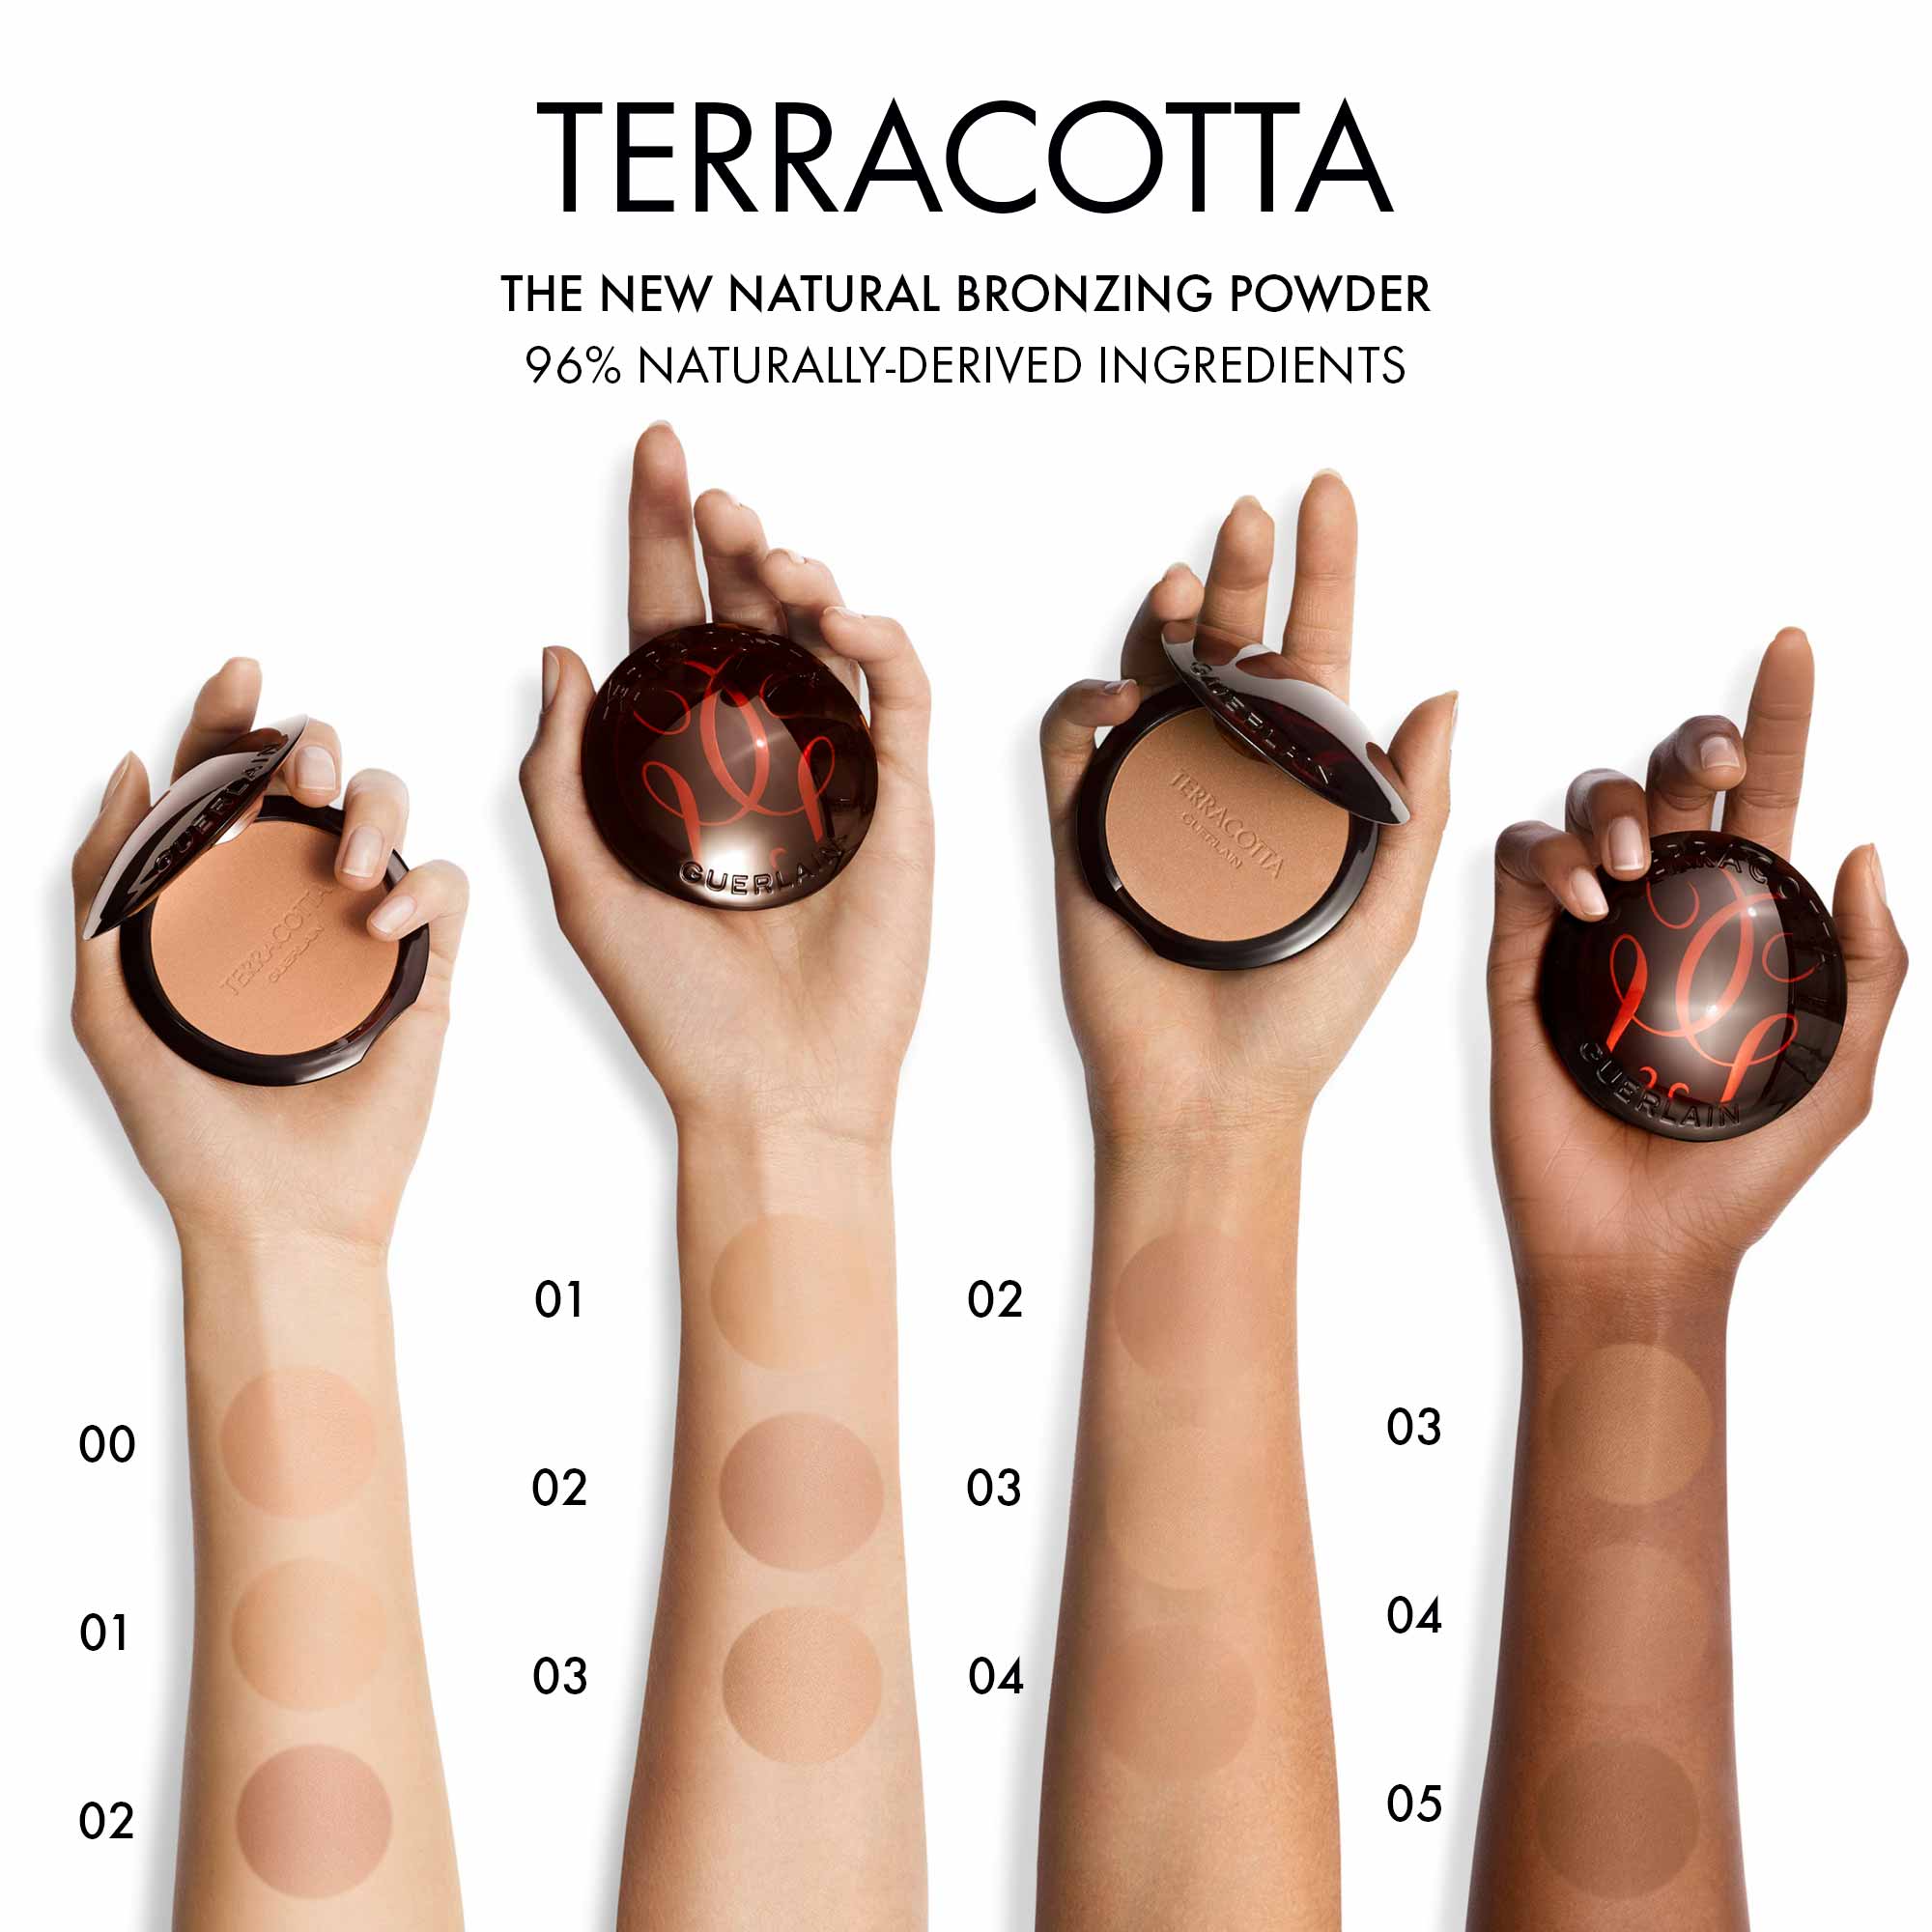 Terracotta The new natural bronzing powder, 96% naturally derived ingredients